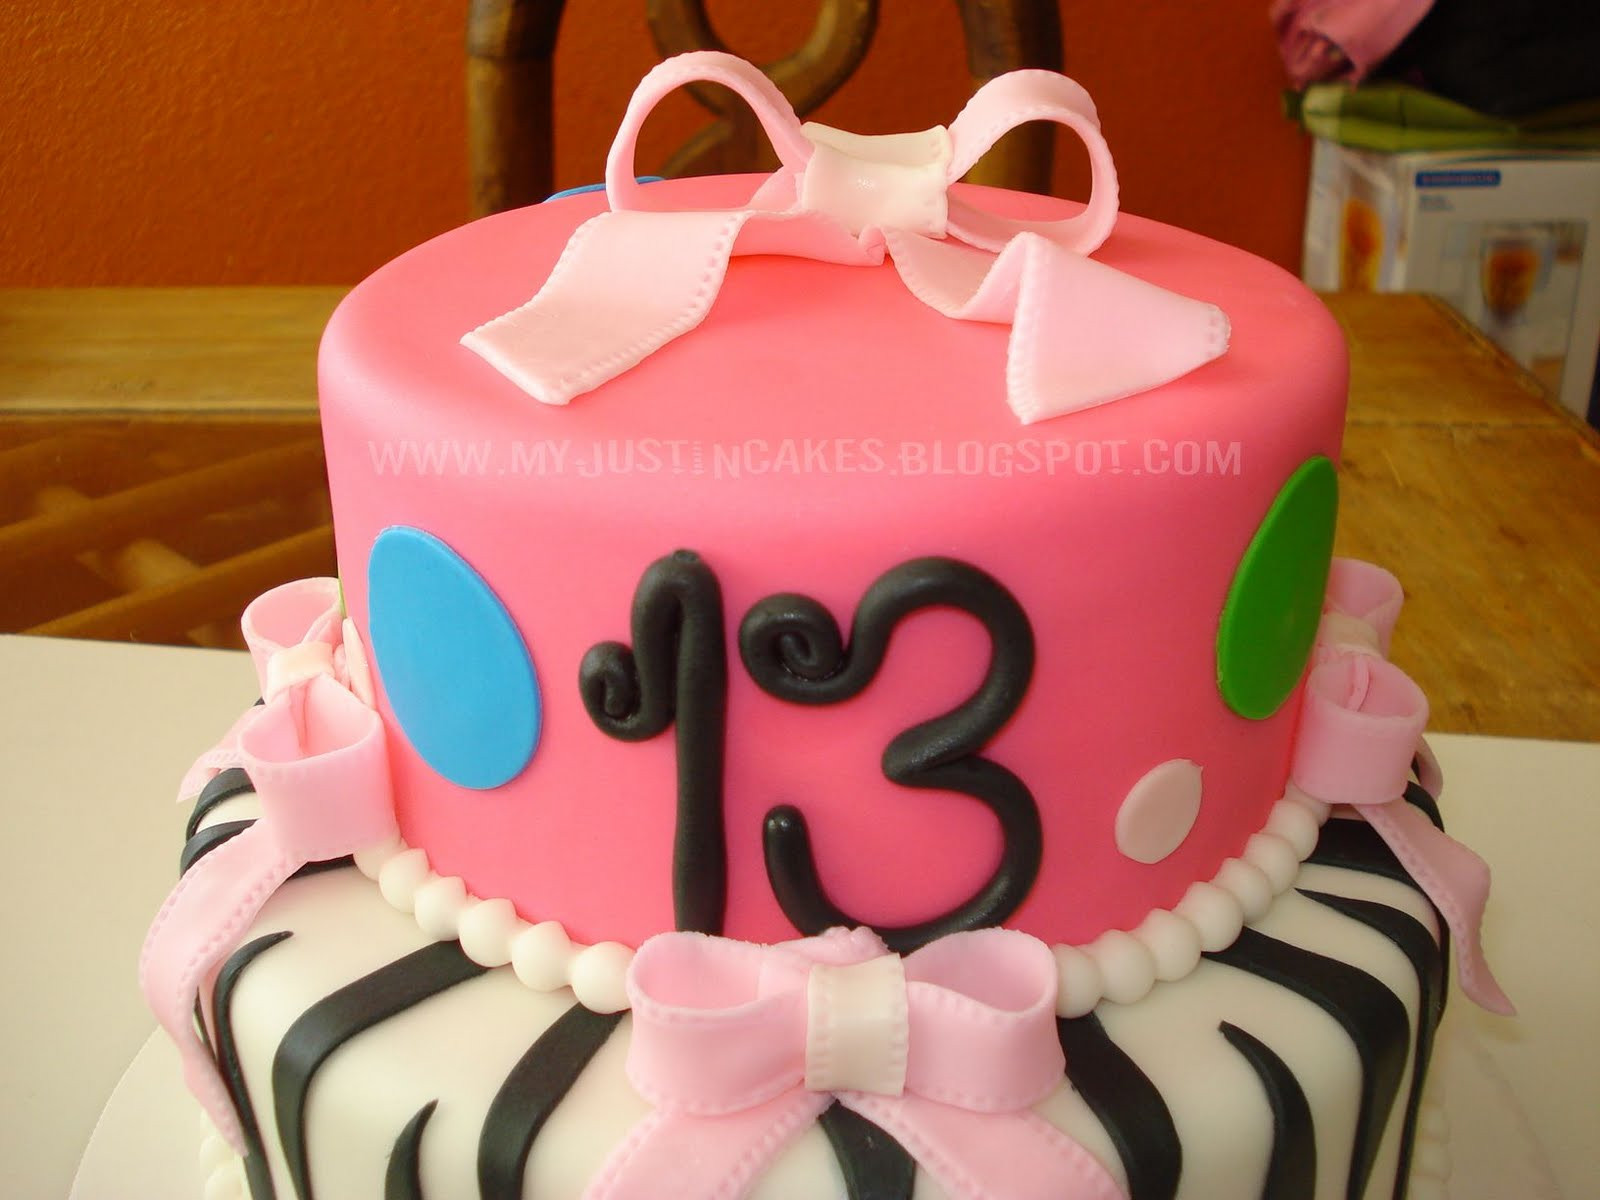 Birthday Party Ideas For A 13 Year Old Girl
 Just in Cakes 13 Year Old Girl Birthday Cake